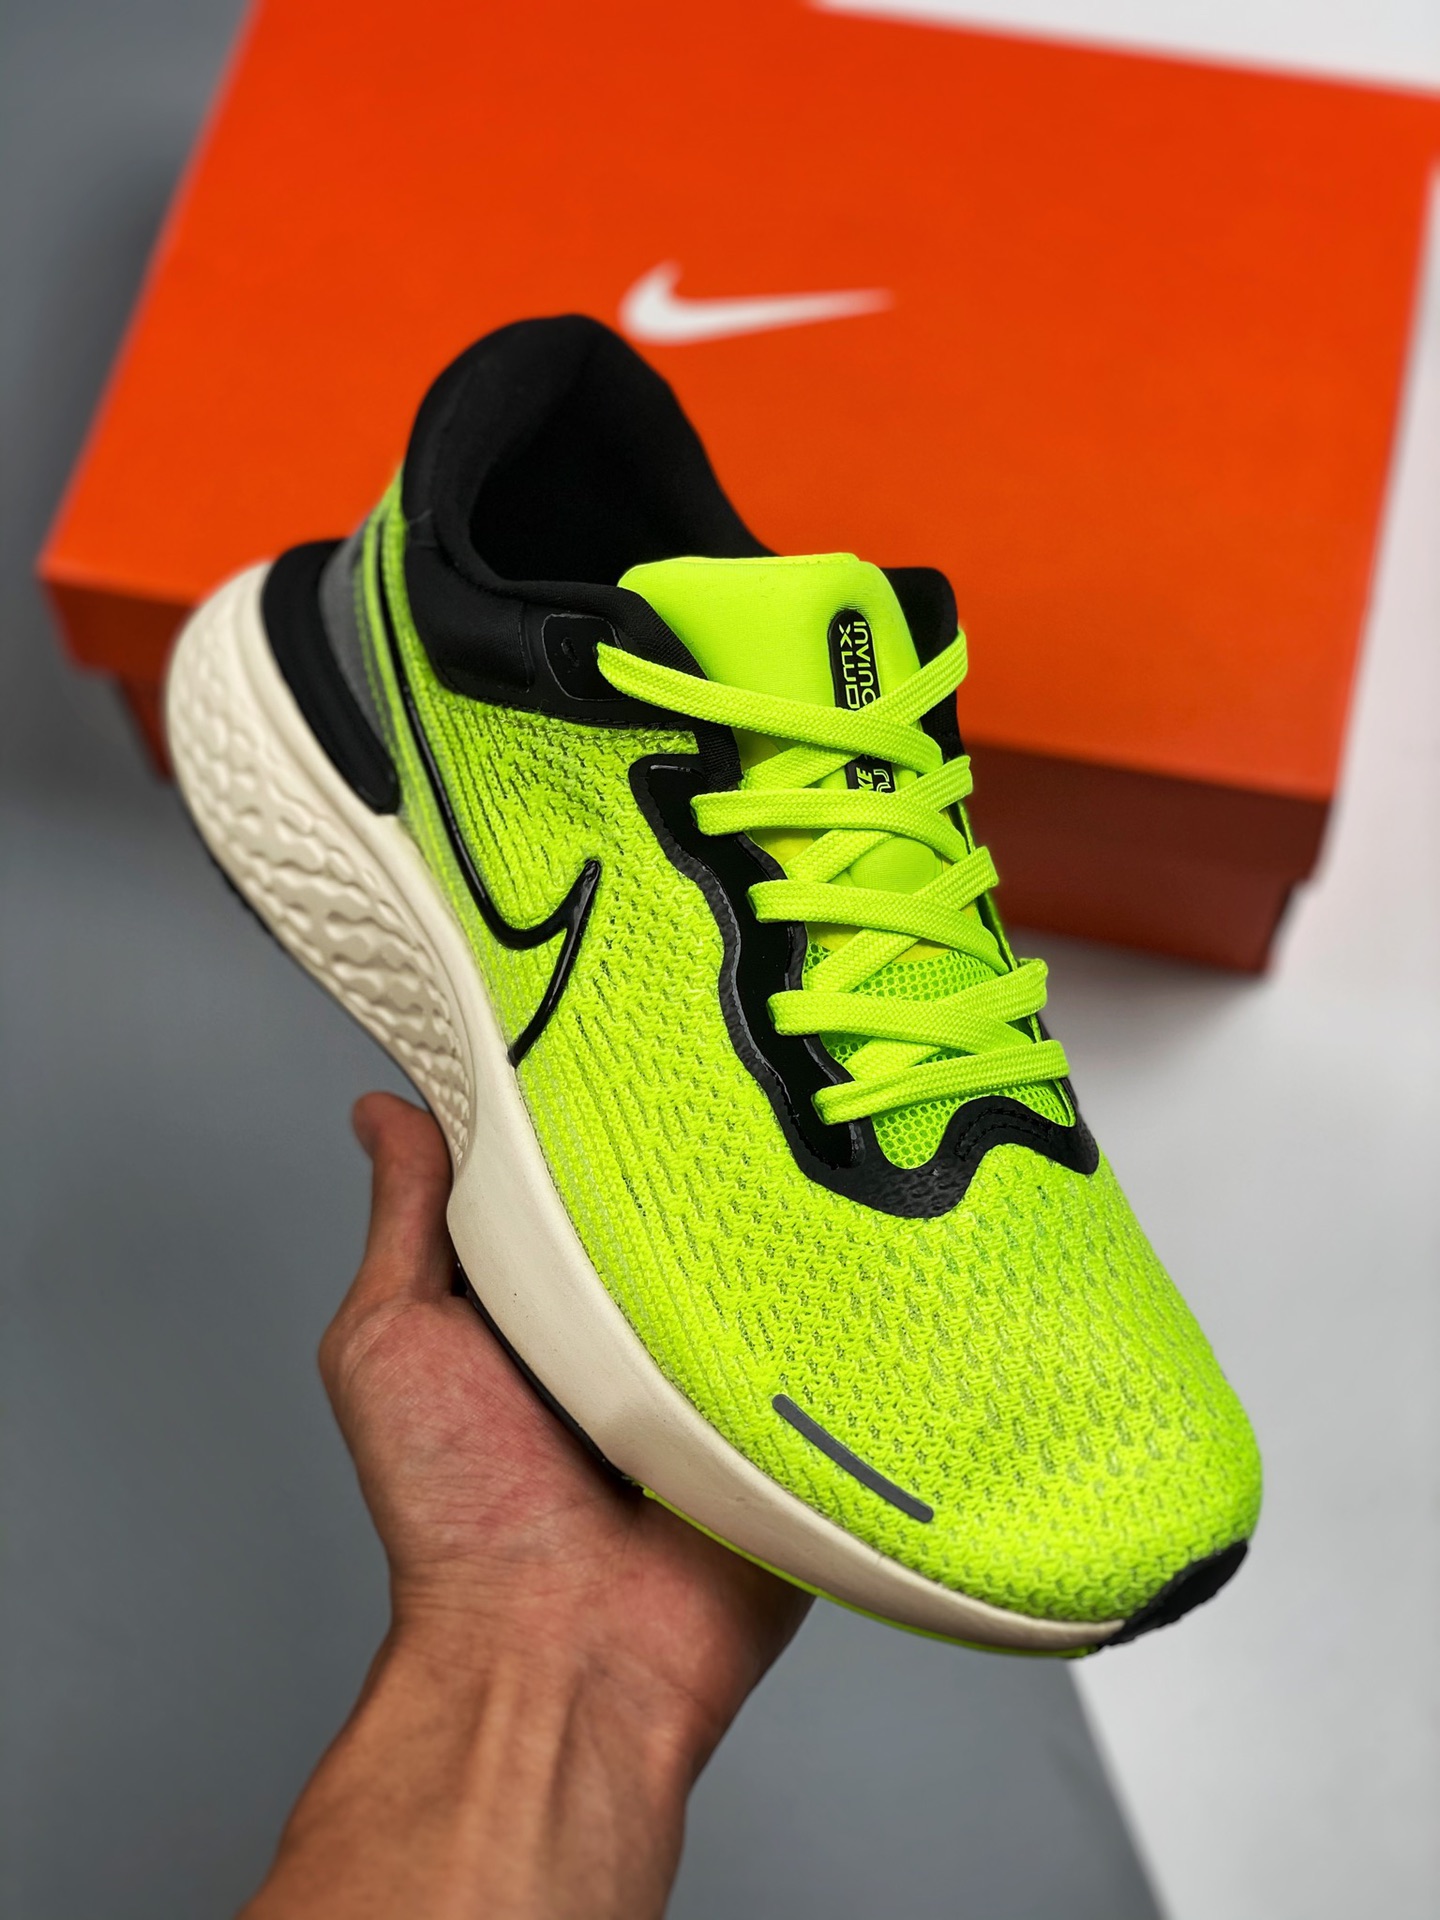 Nike ZoomX Invincible Run Flyknit Volt/Barely Volt/Black Shoes